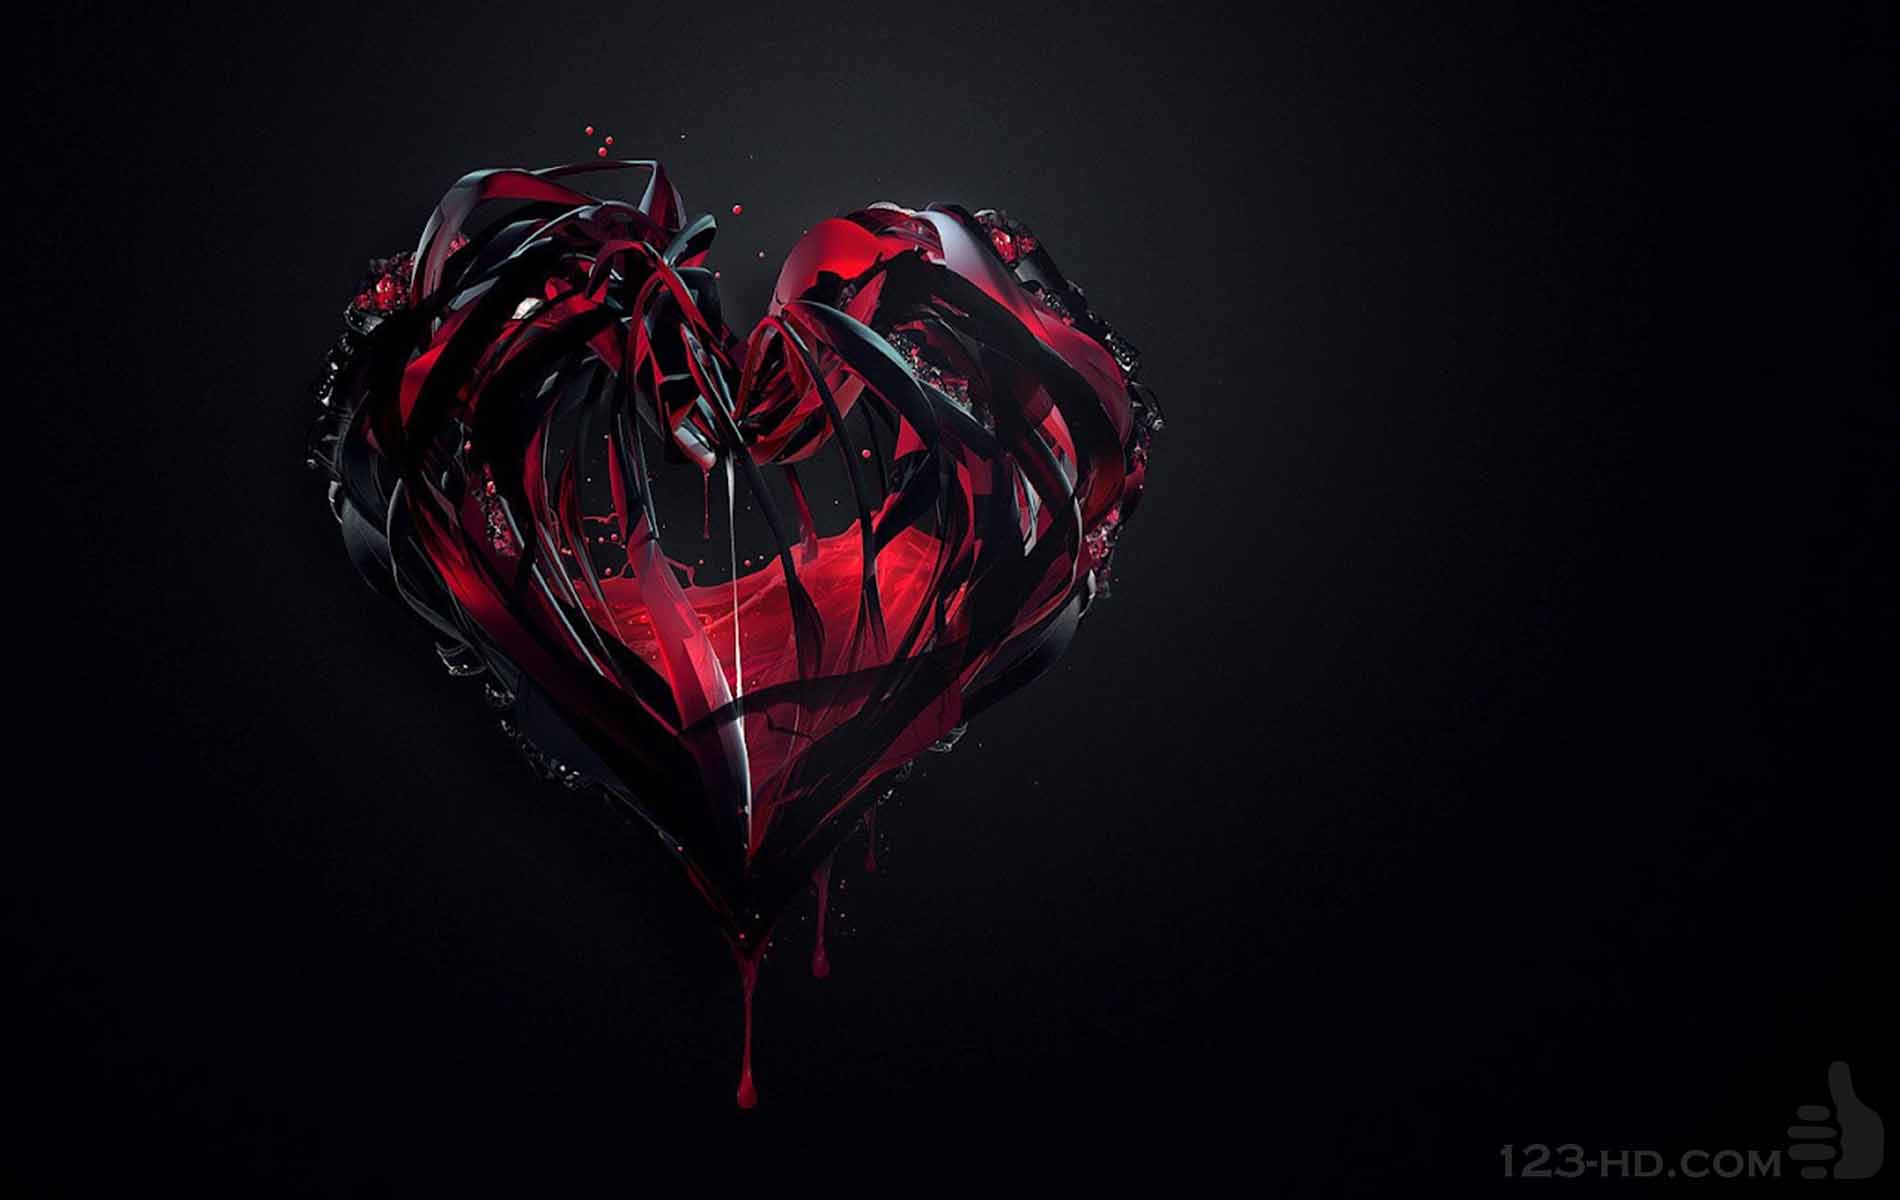 Red and Black Heart Wallpapers - Top Free Red and Black Heart ...